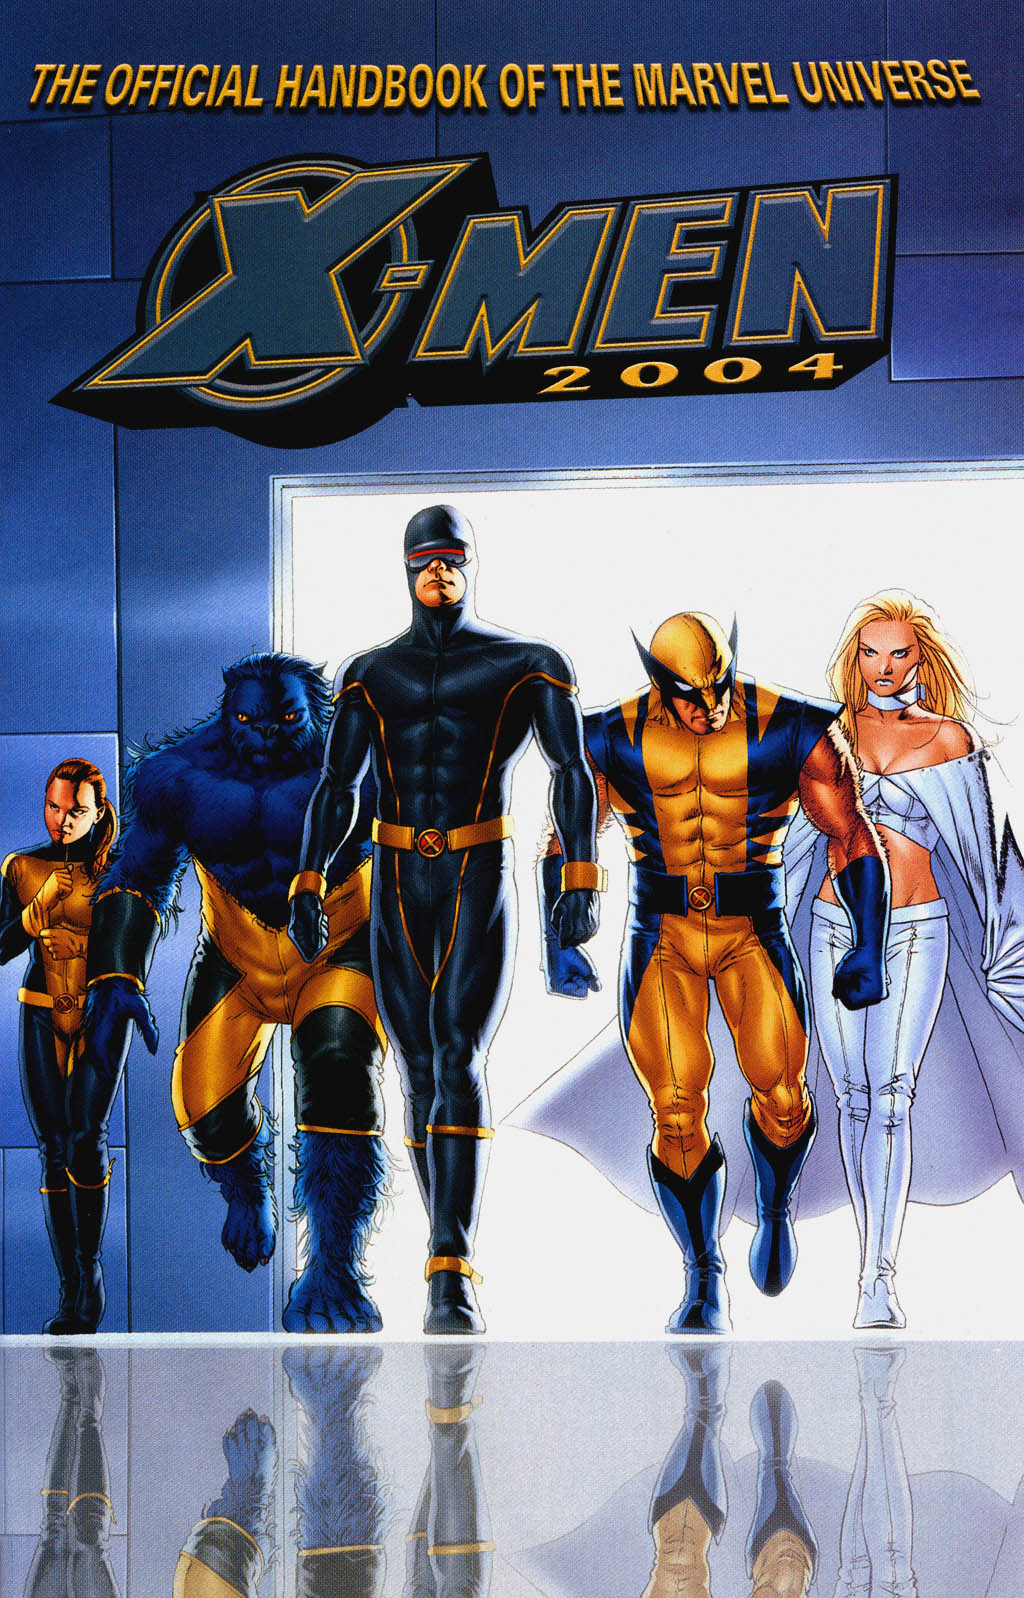 Read online Official Handbook of the Marvel Universe: X-Men 2004 comic -  Issue # Full - 2